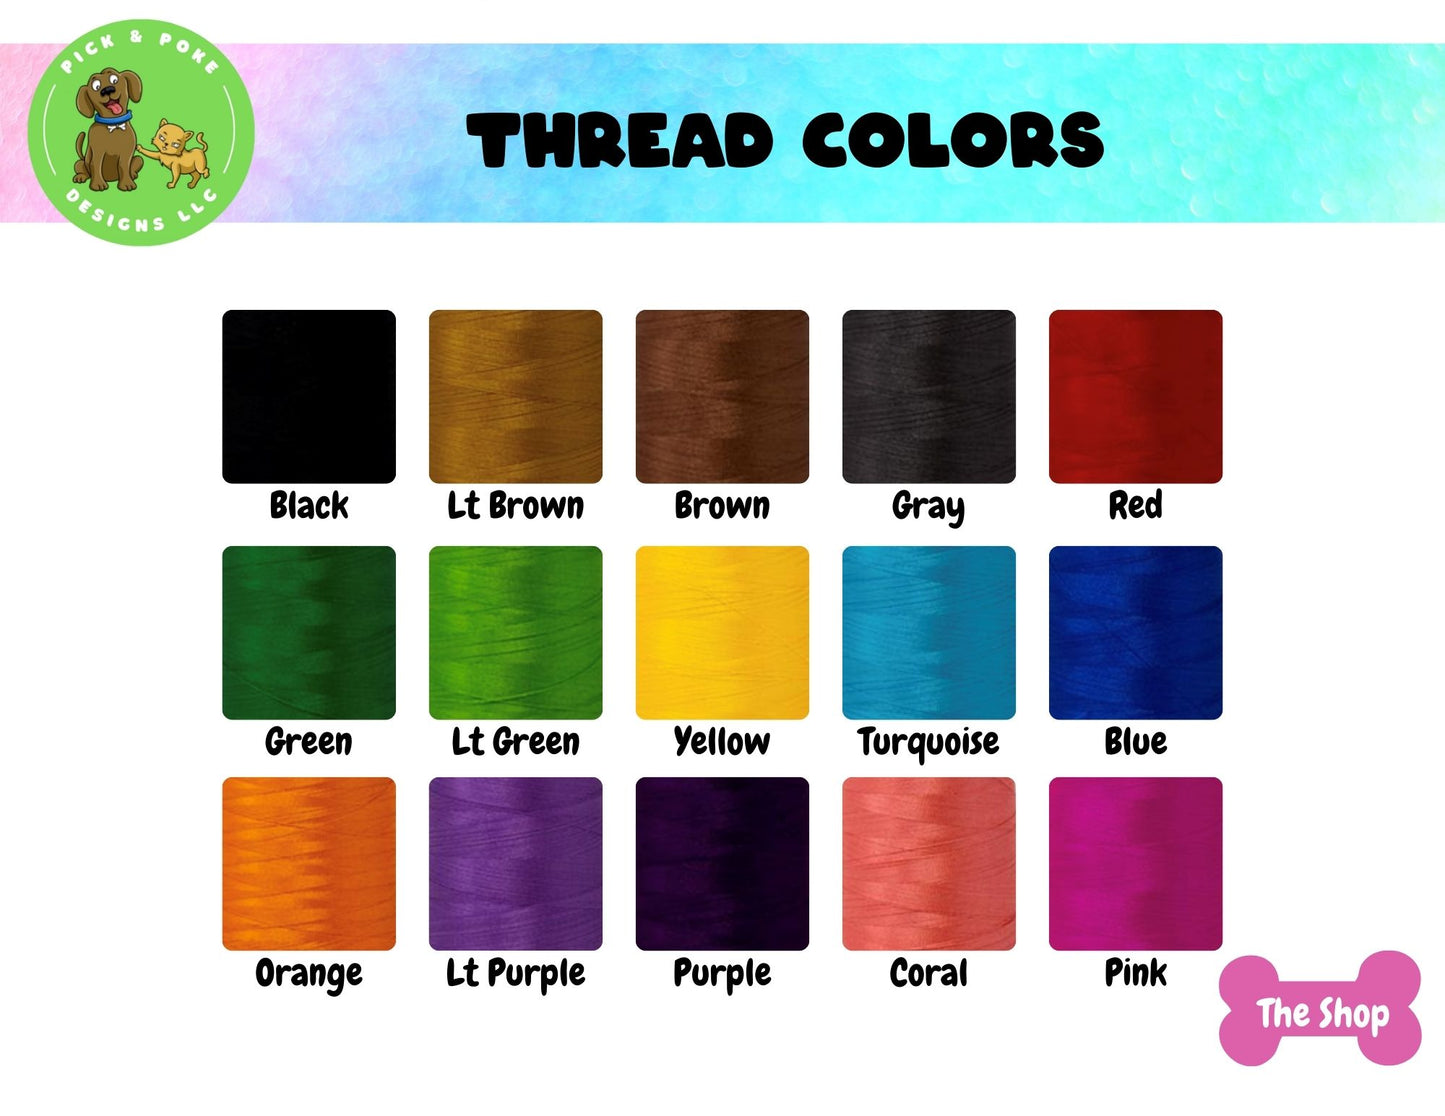 Fifteen thread colors are available for NAME keychains